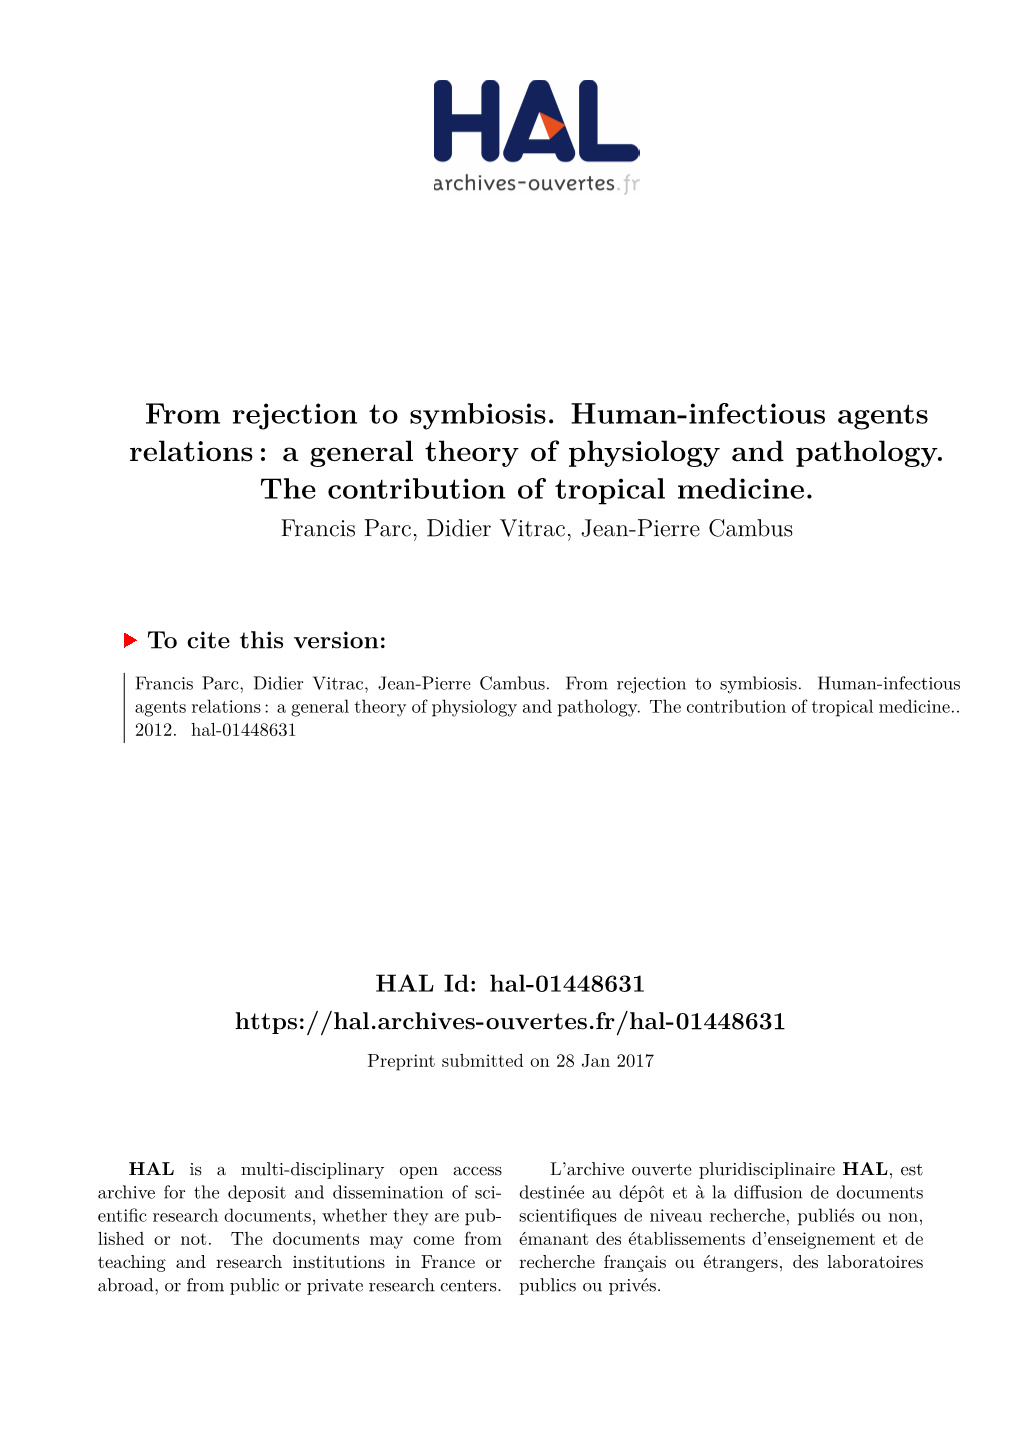 From Rejection to Symbiosis. Human-Infectious Agents Relations : a General Theory of Physiology and Pathology